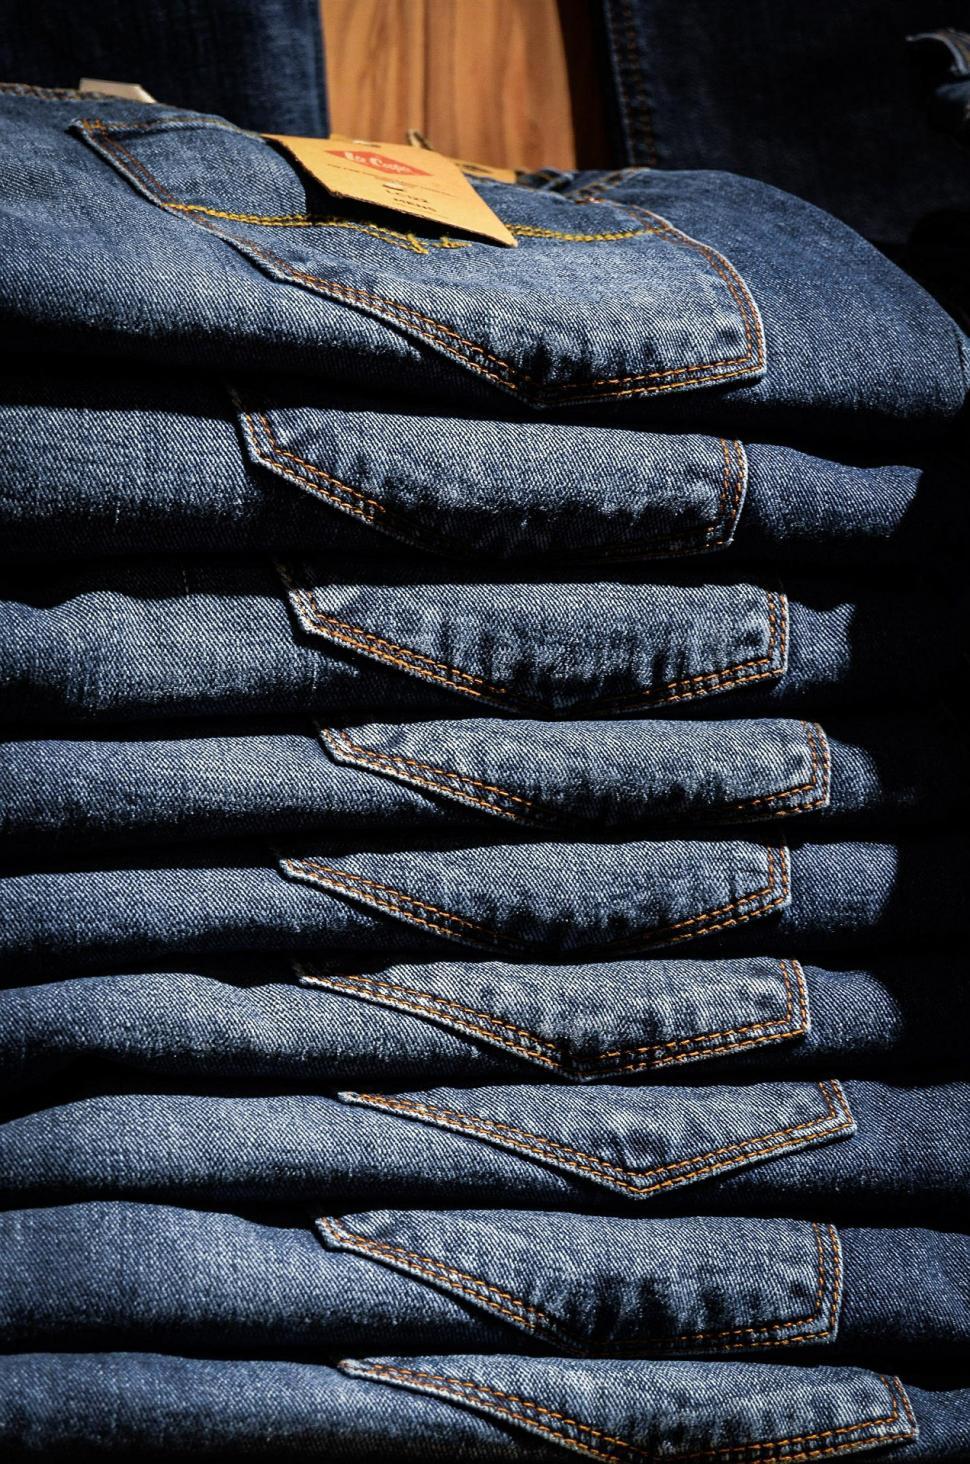 Free Image of Pile of Blue Jeans Arranged Neatly 